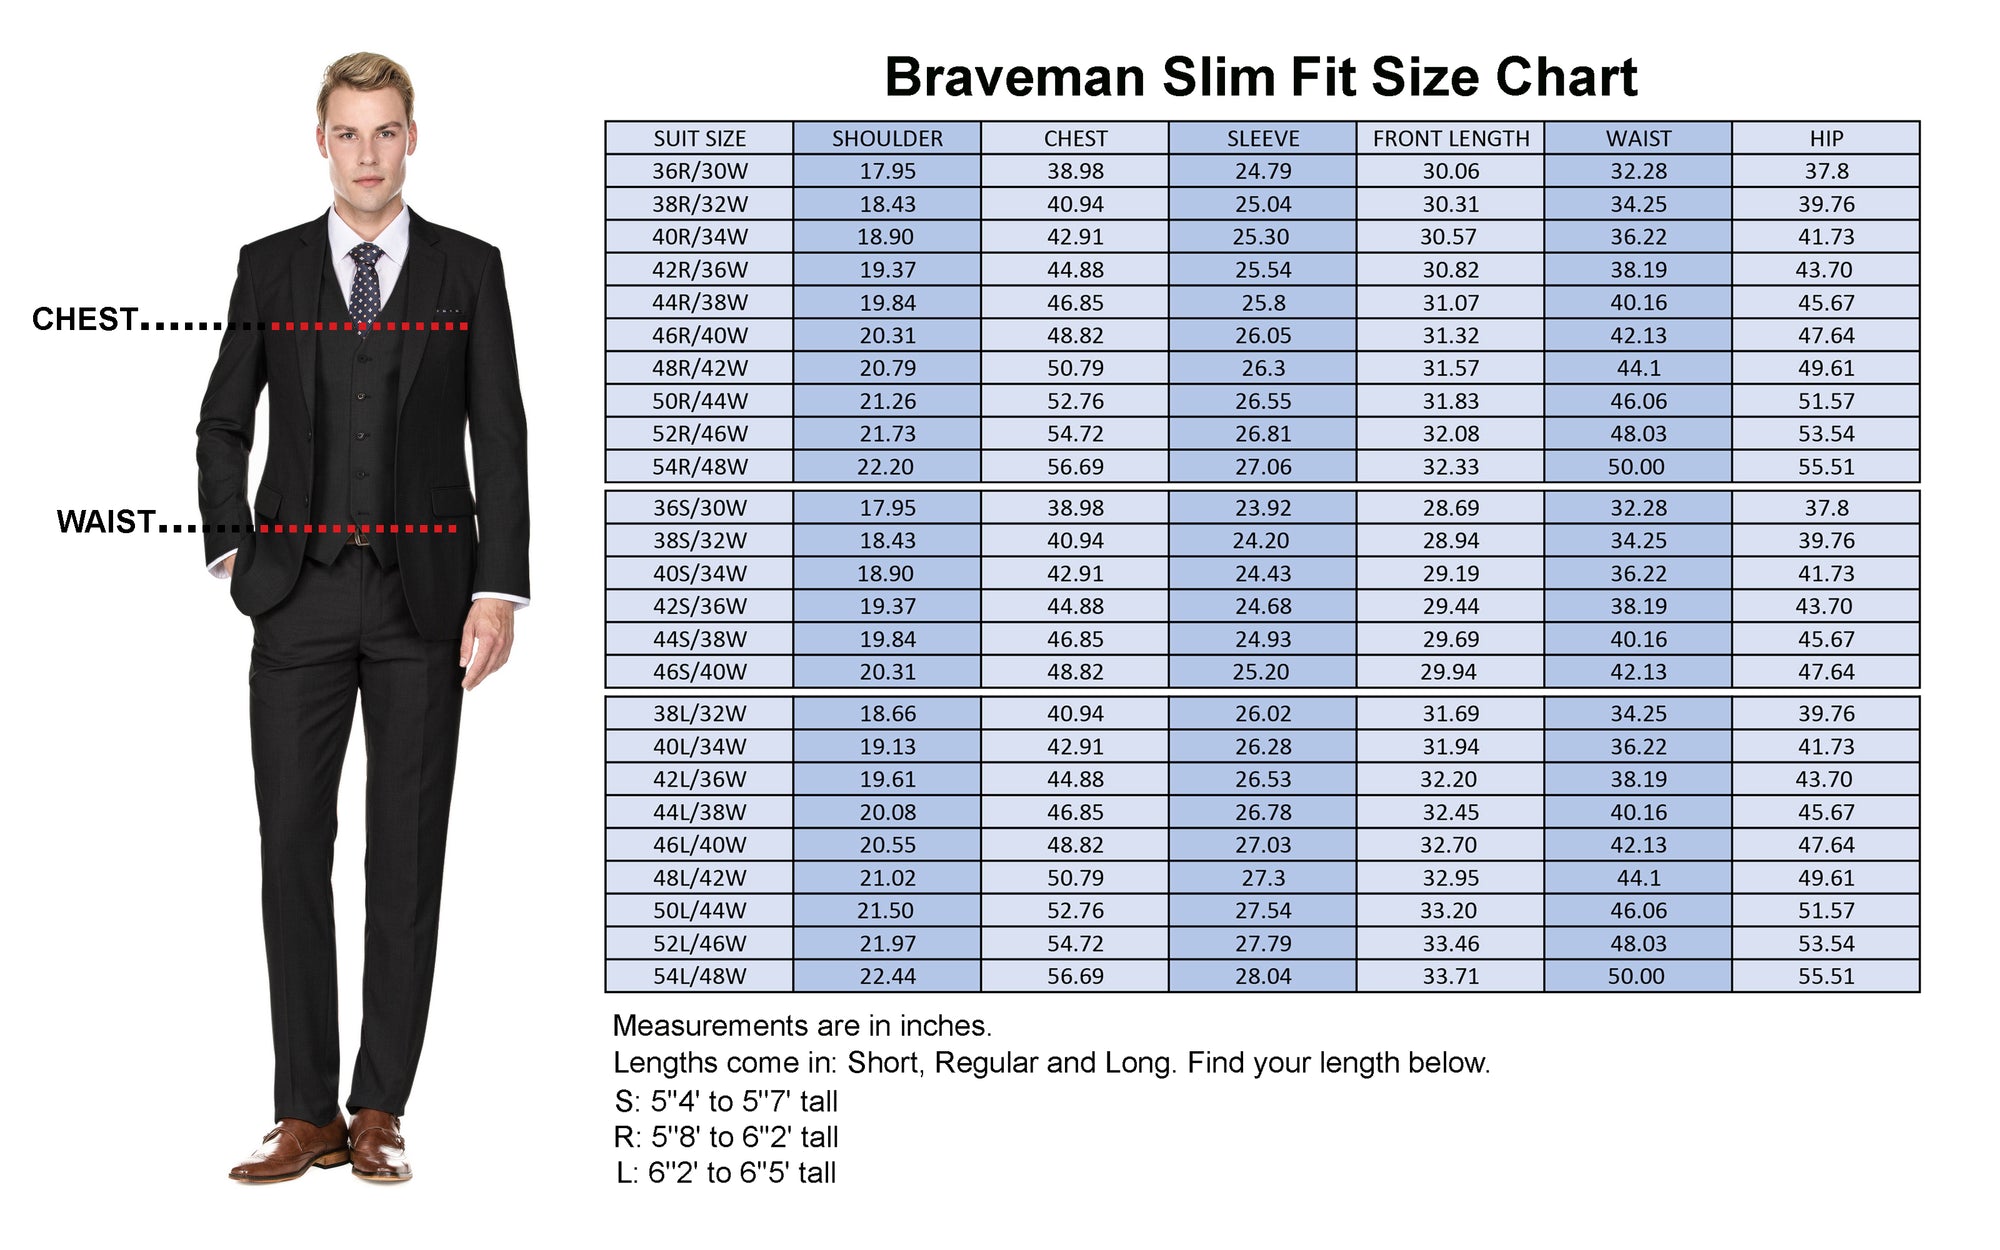 Slim Fit 3PC Tailored Check Suit